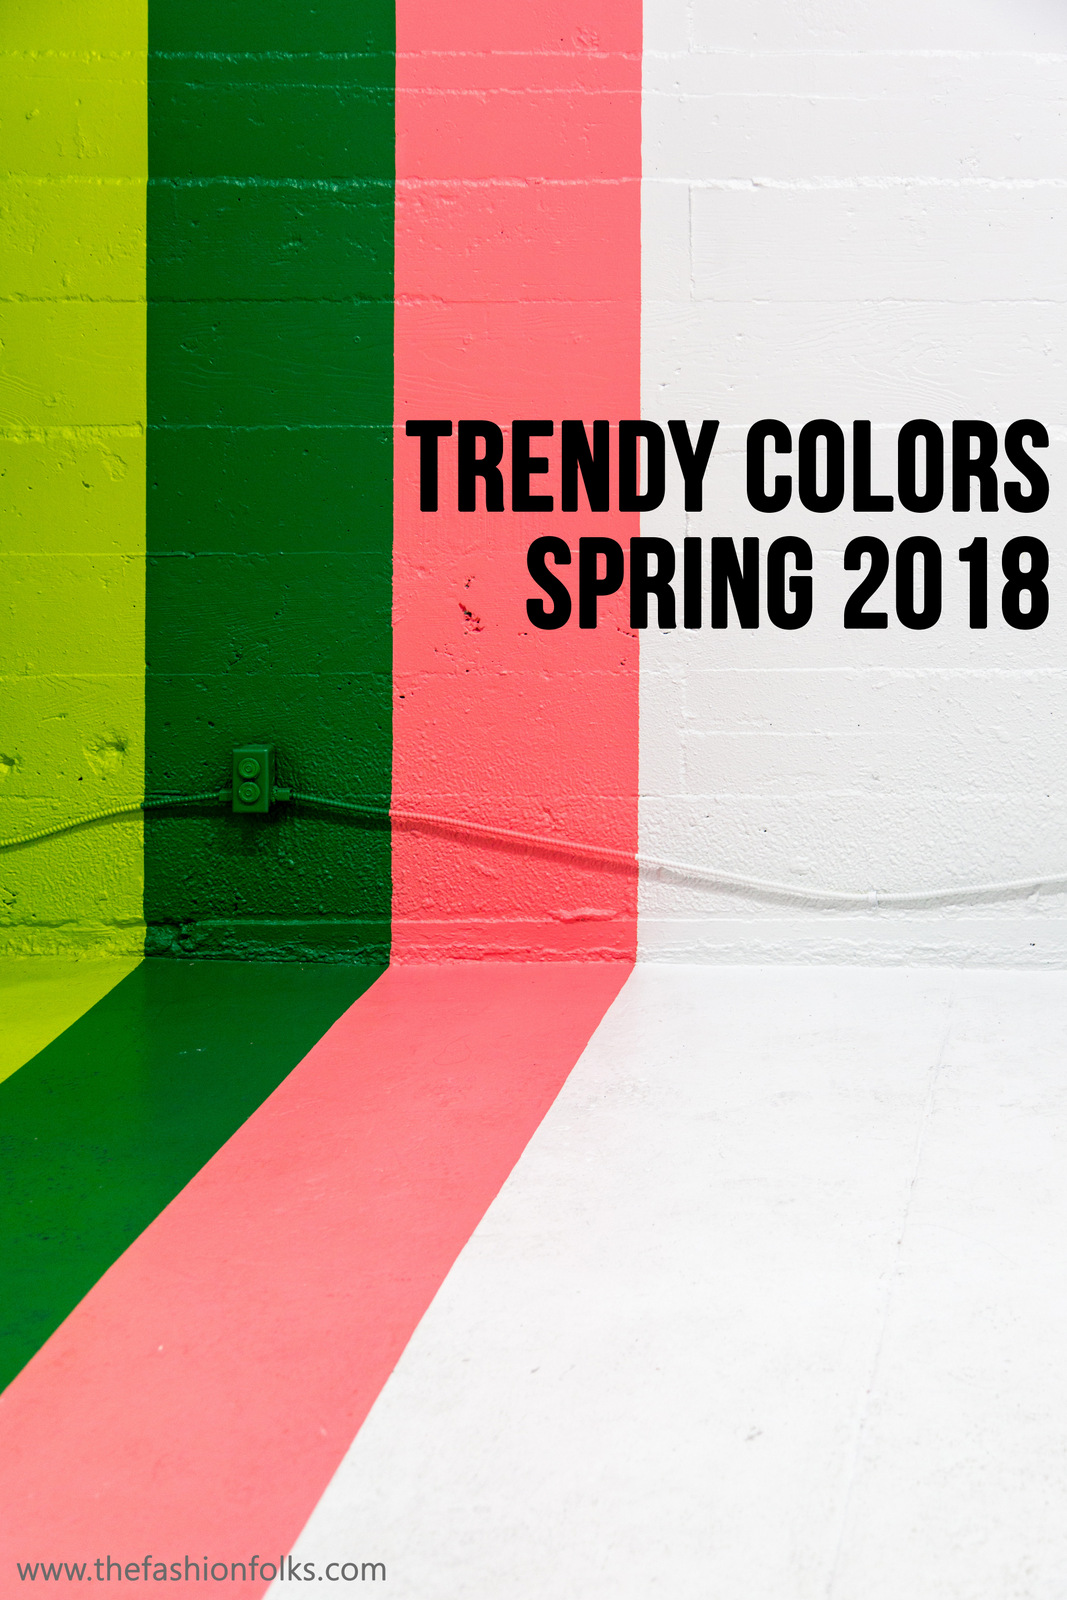 Trendy Colors Spring 2018